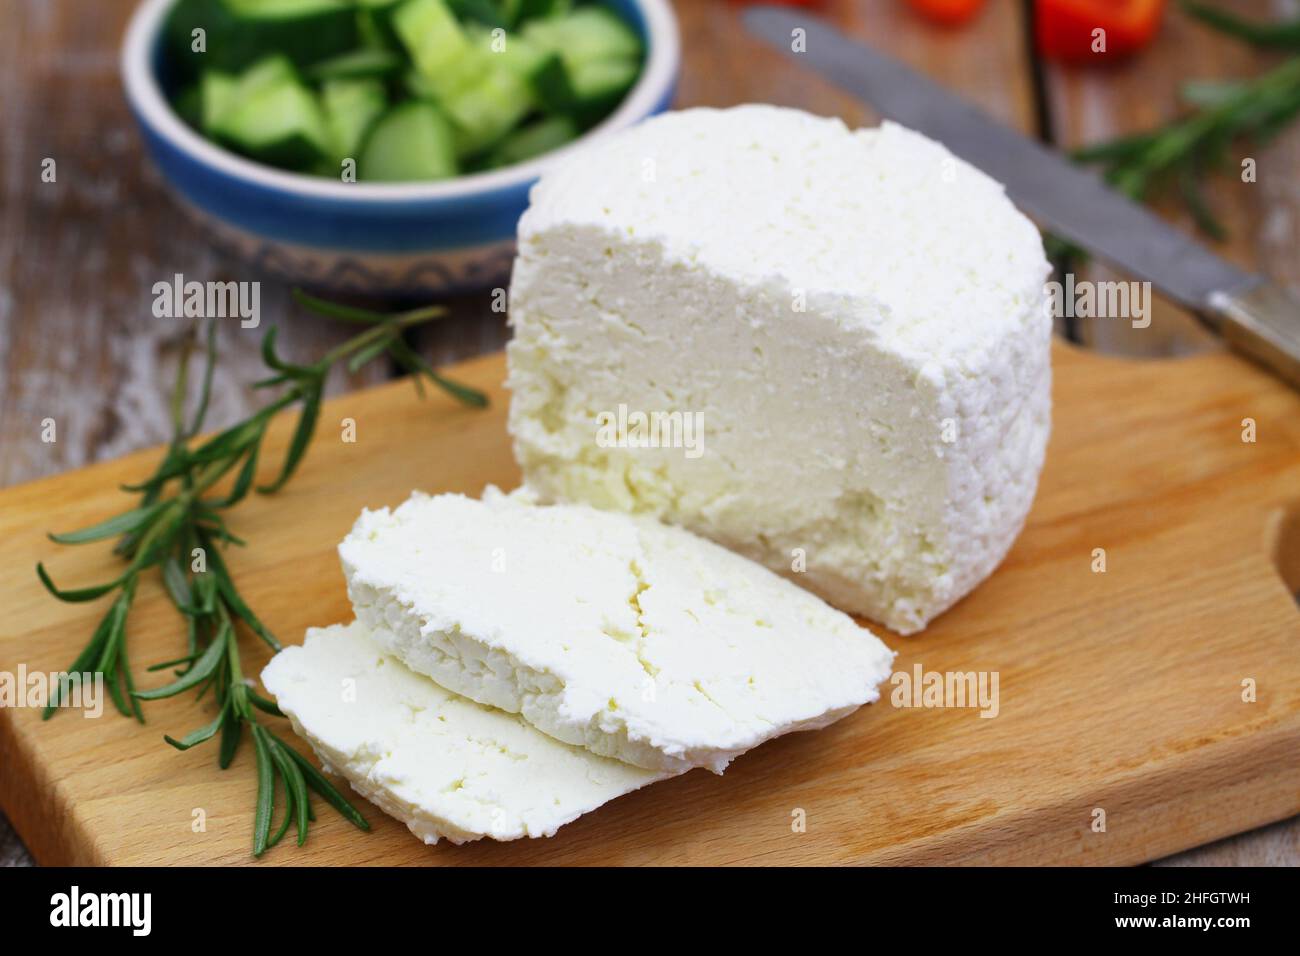 Slices of curd cheese, traditional Polish dairy product on wooden board Stock Photo